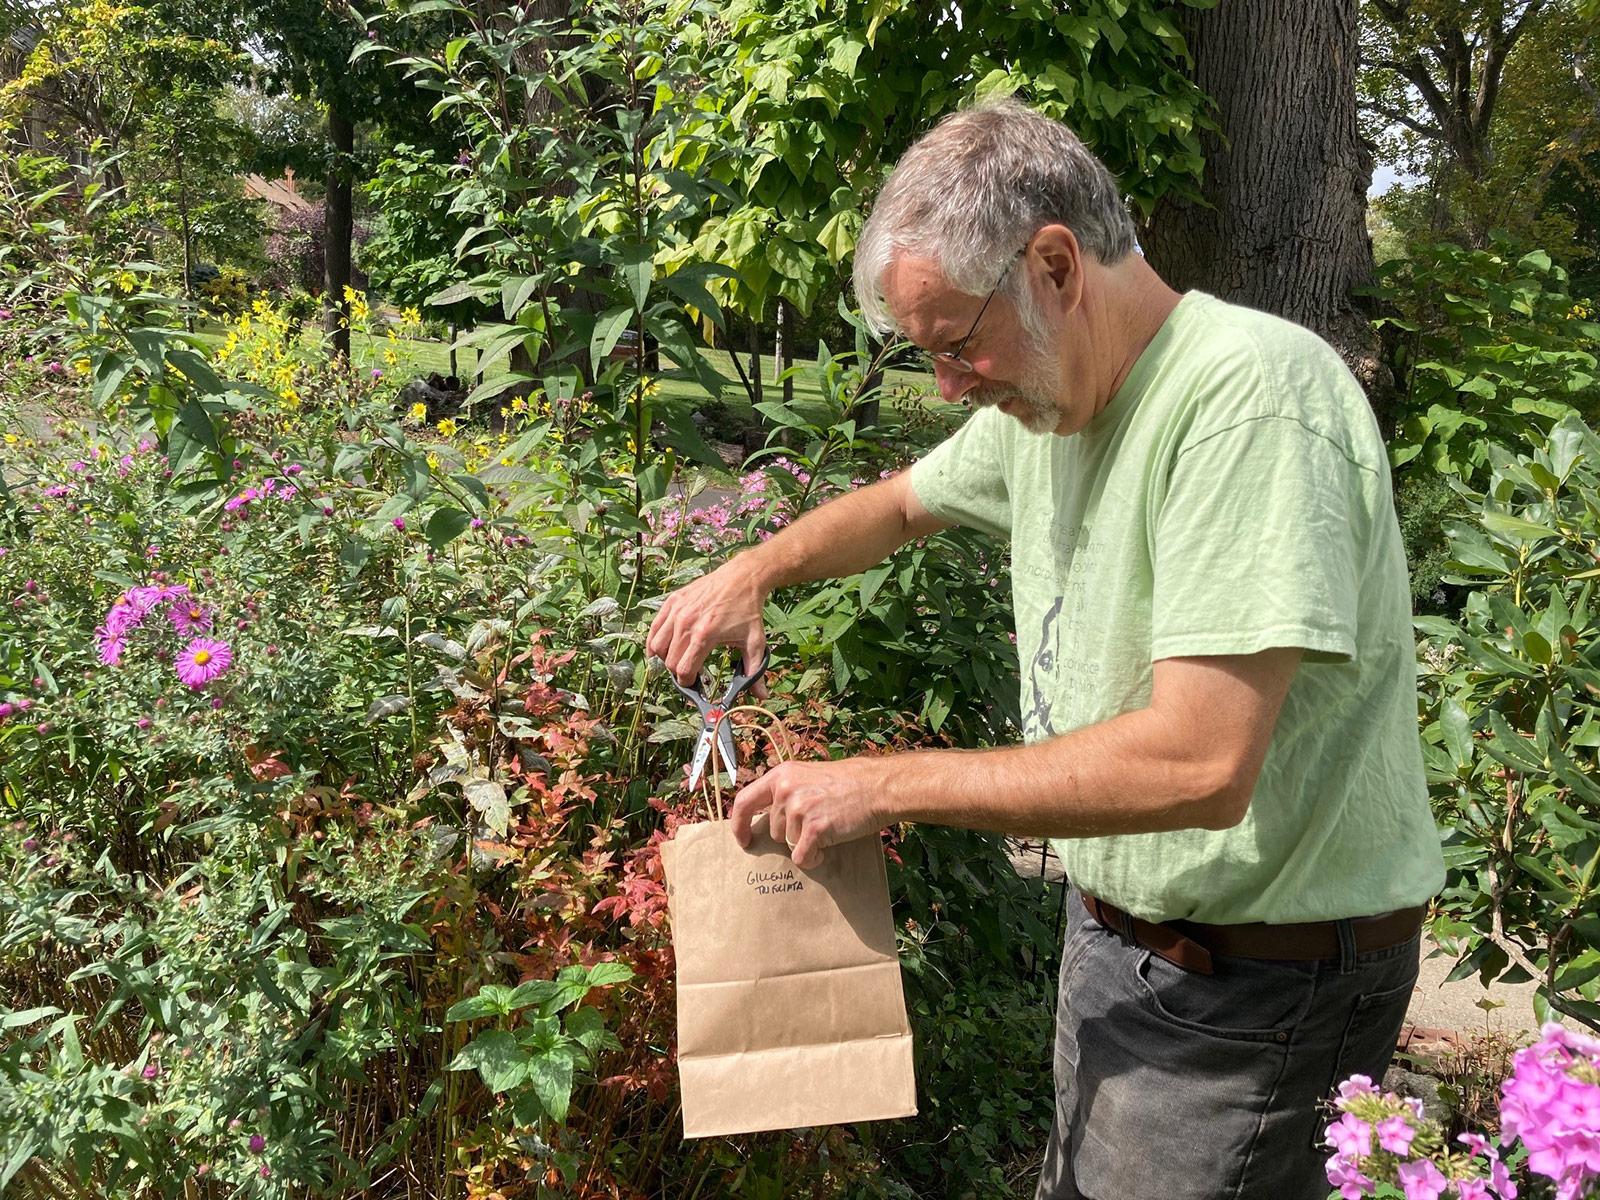 Jim Sirch collecting wildflower seeds